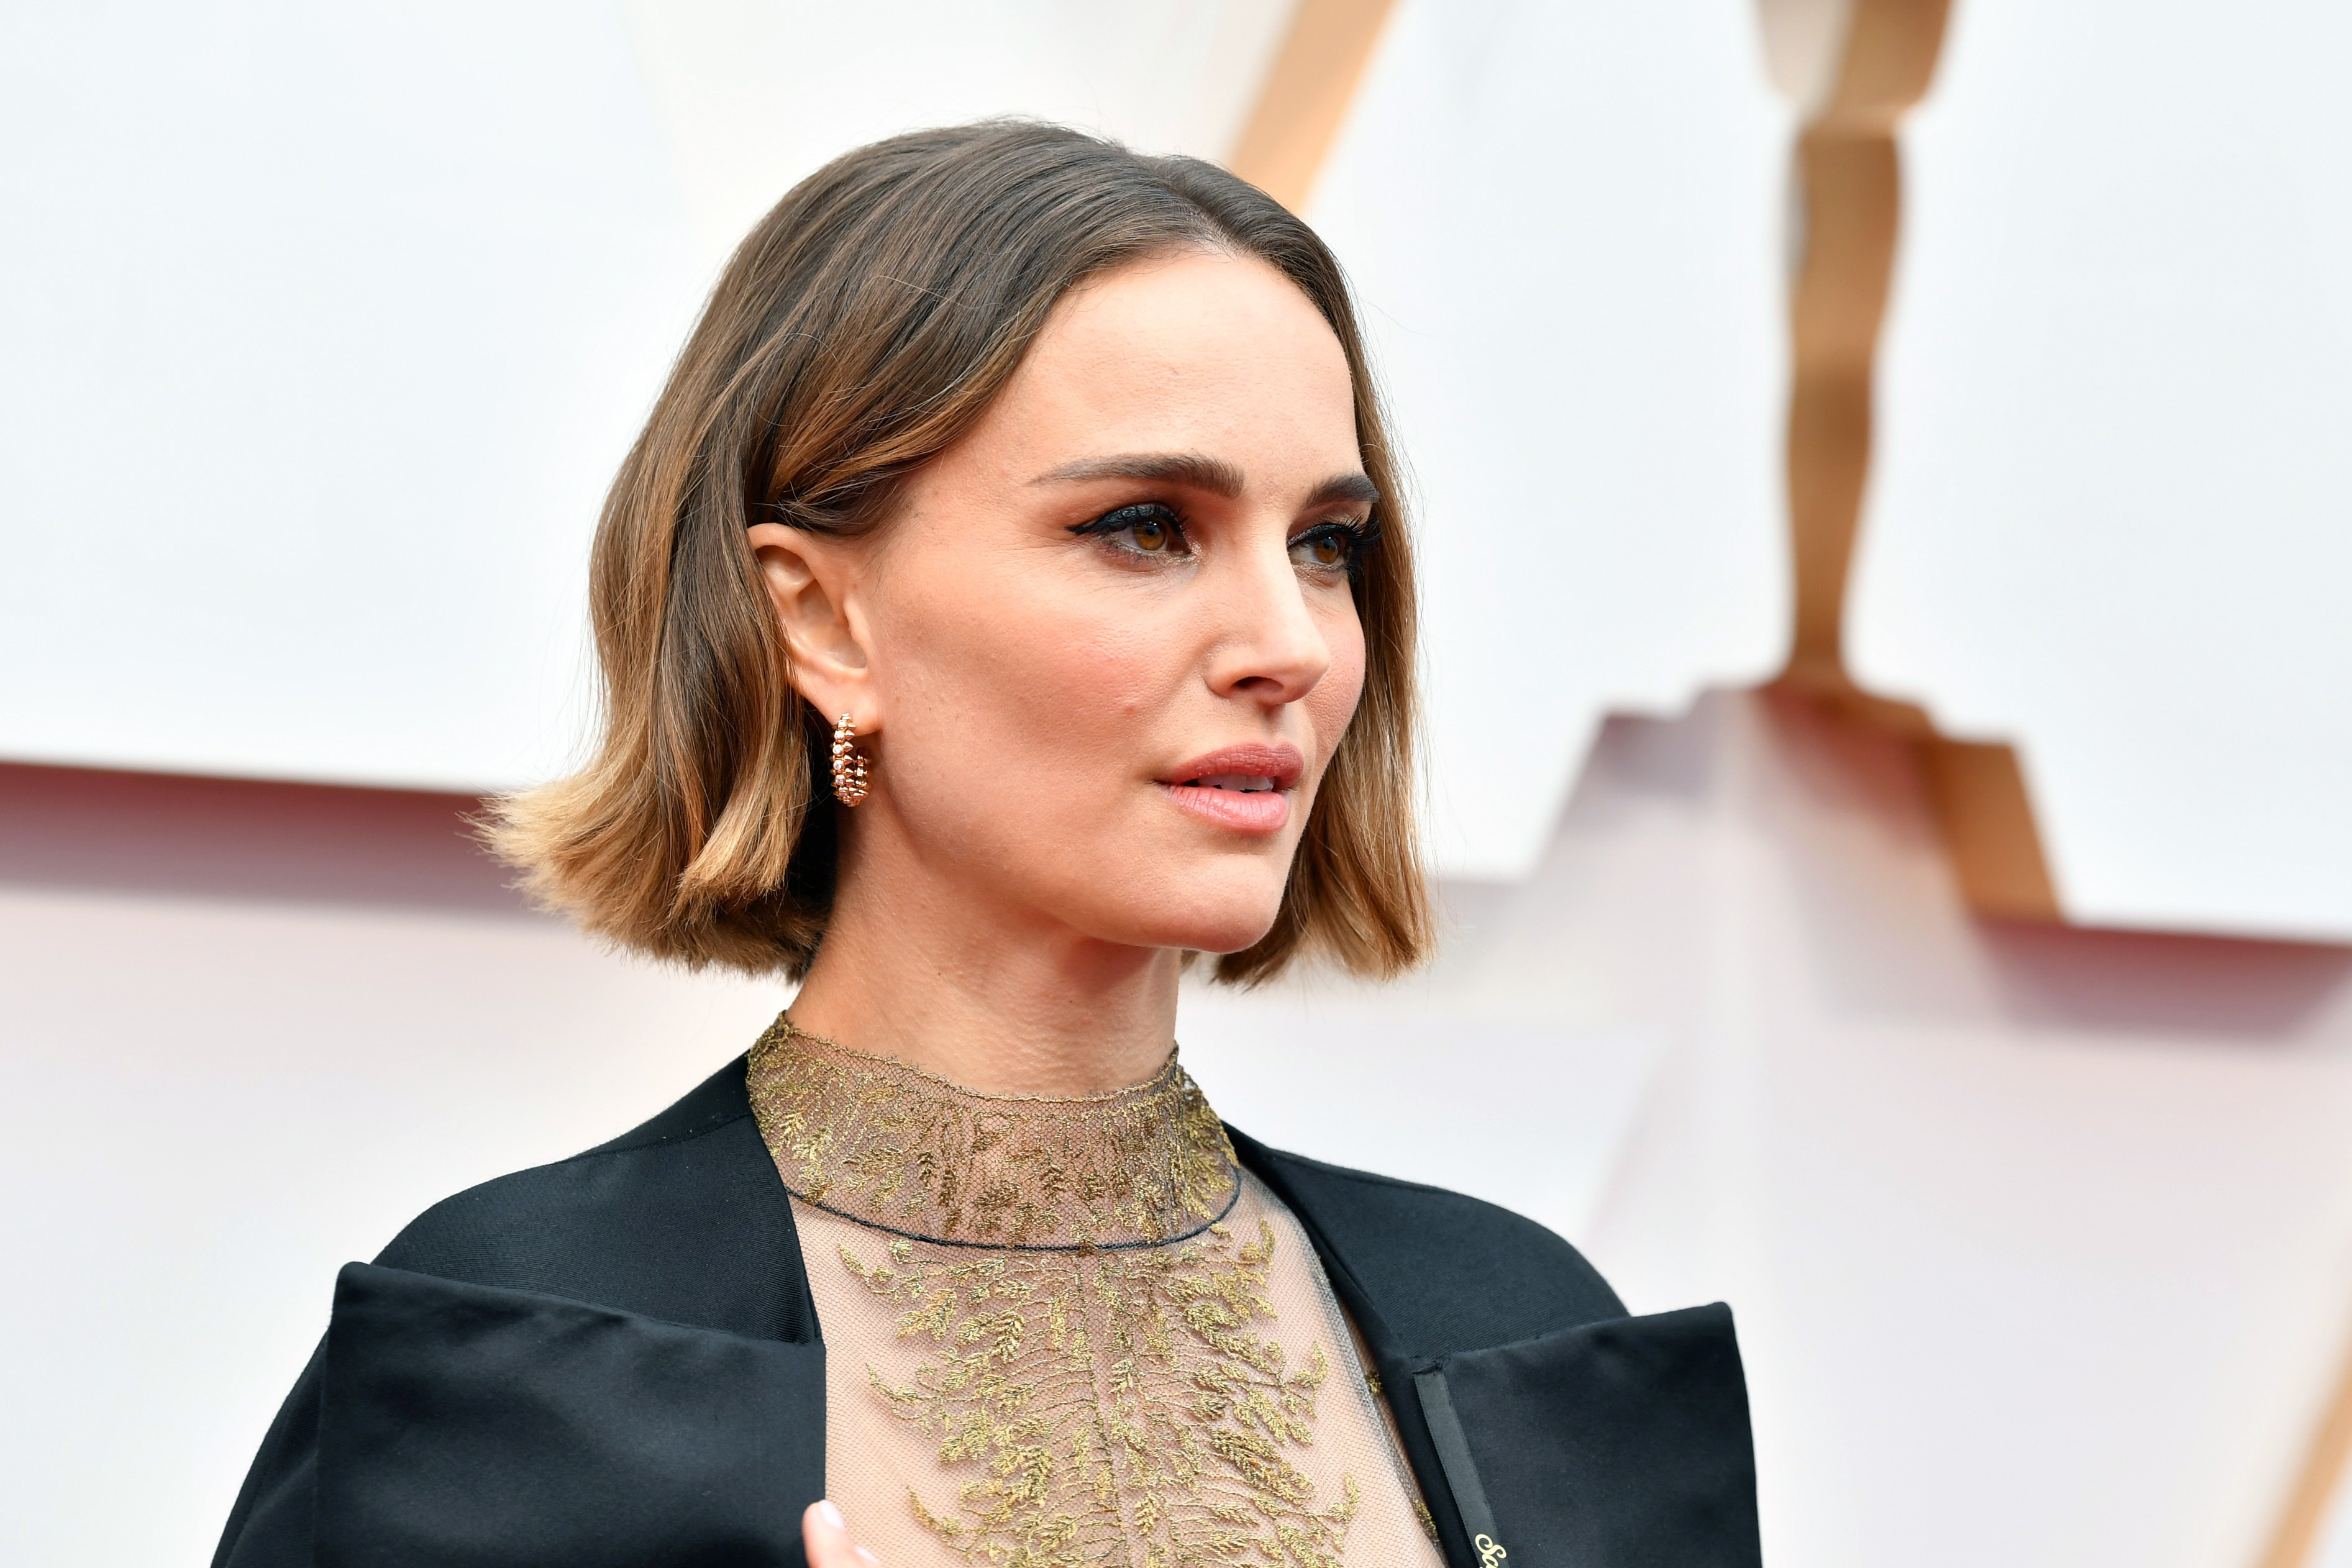 Www Xxx 13yers Sex Com - Natalie Portman On Being Sexualized As A Child Actor